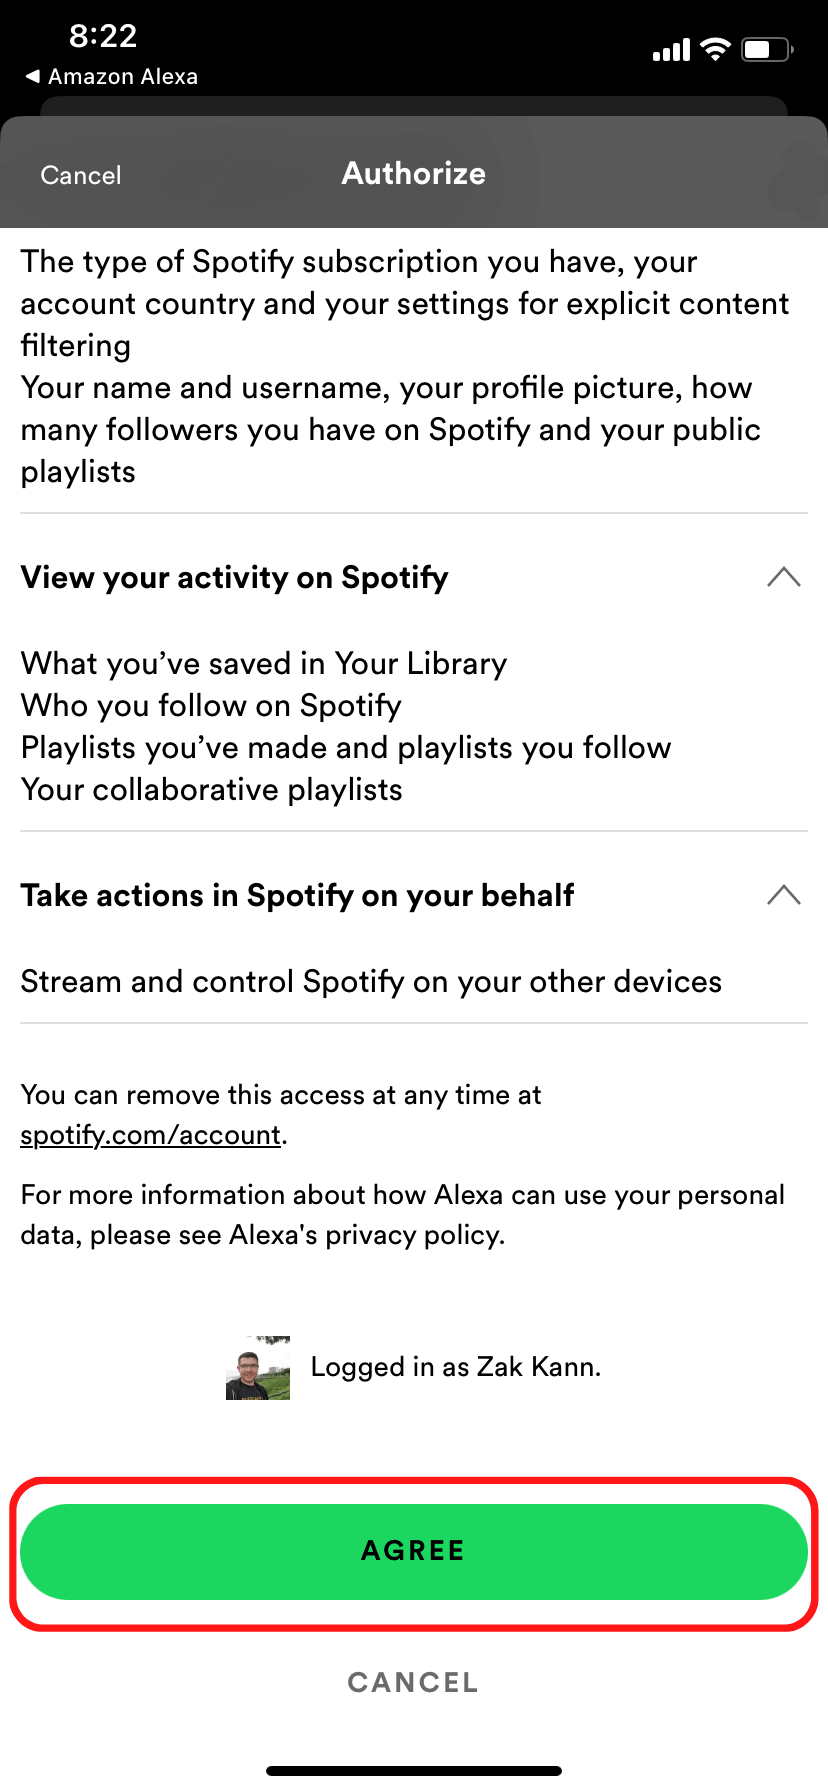 The access request screen when linking Spotify to Alexa